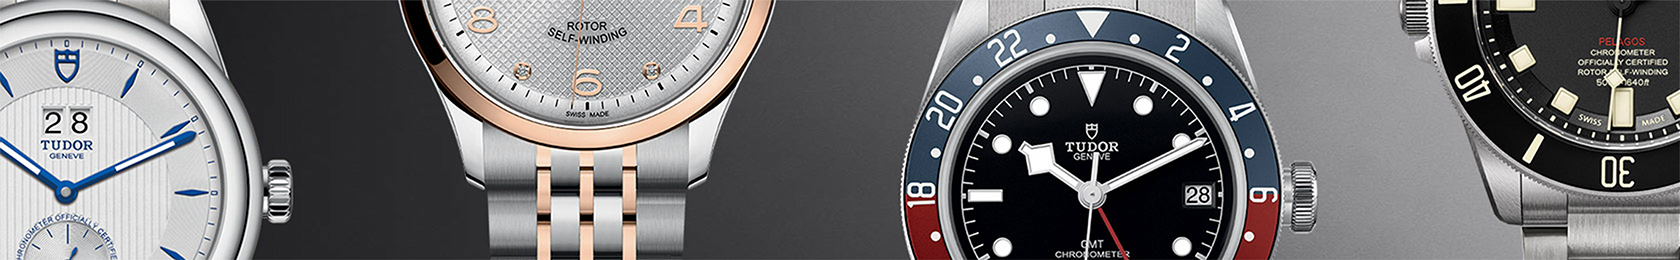 TUDOR | CHATHAM LUXURY - EXPERIENCE THE WORLD'S FINEST TIMEPIECES